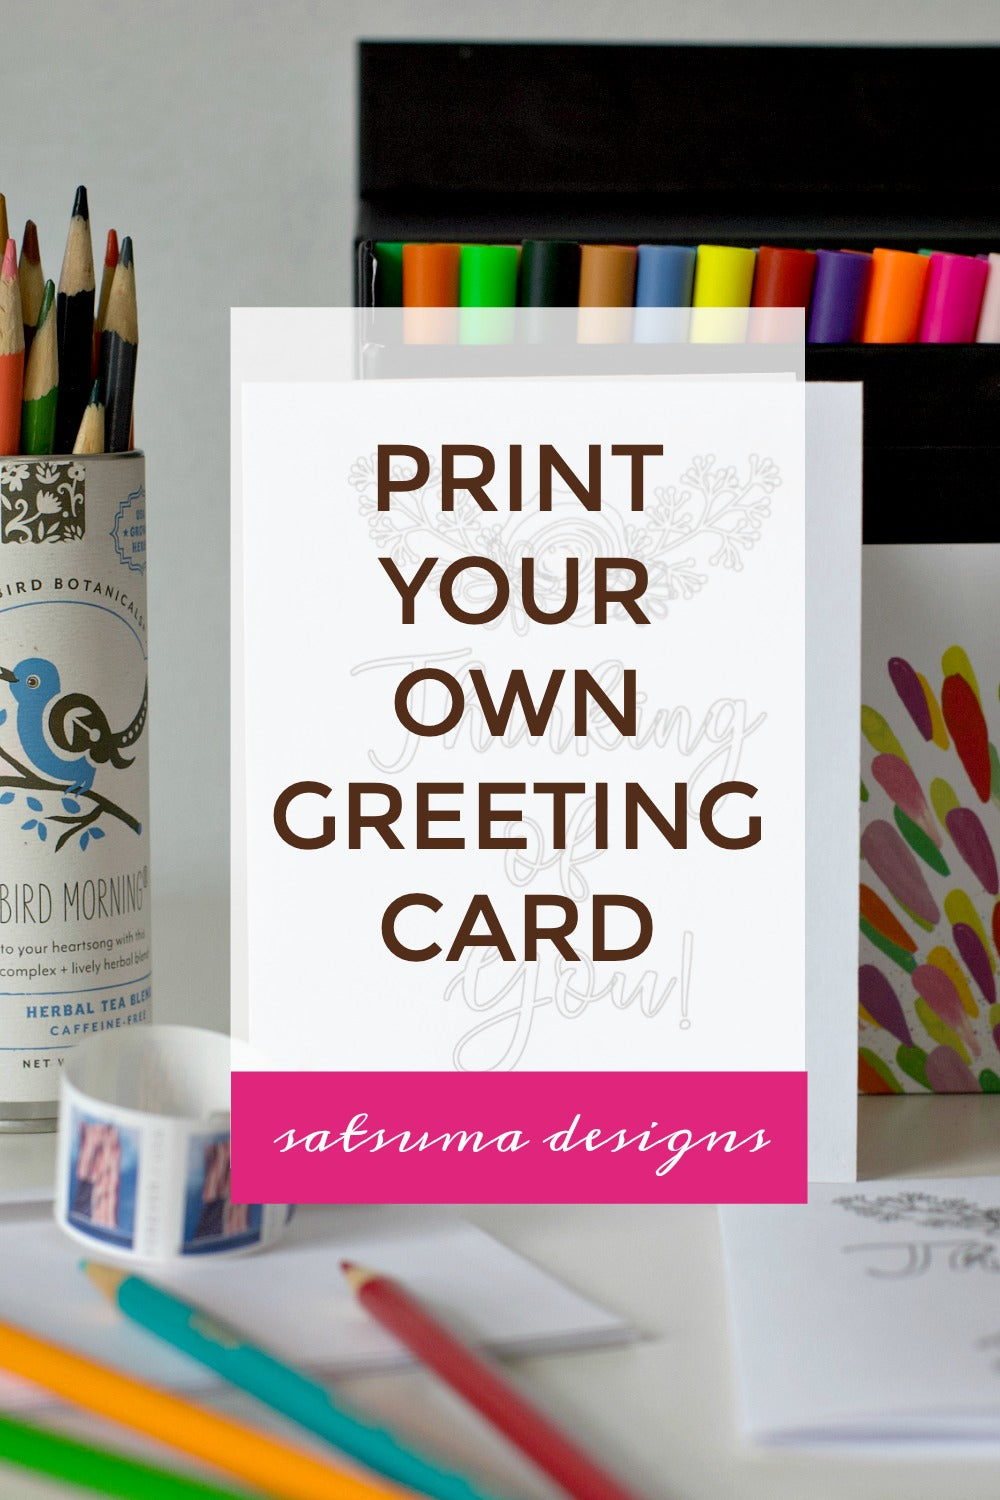 Print Your Own Greeting Card | Send Love Today!